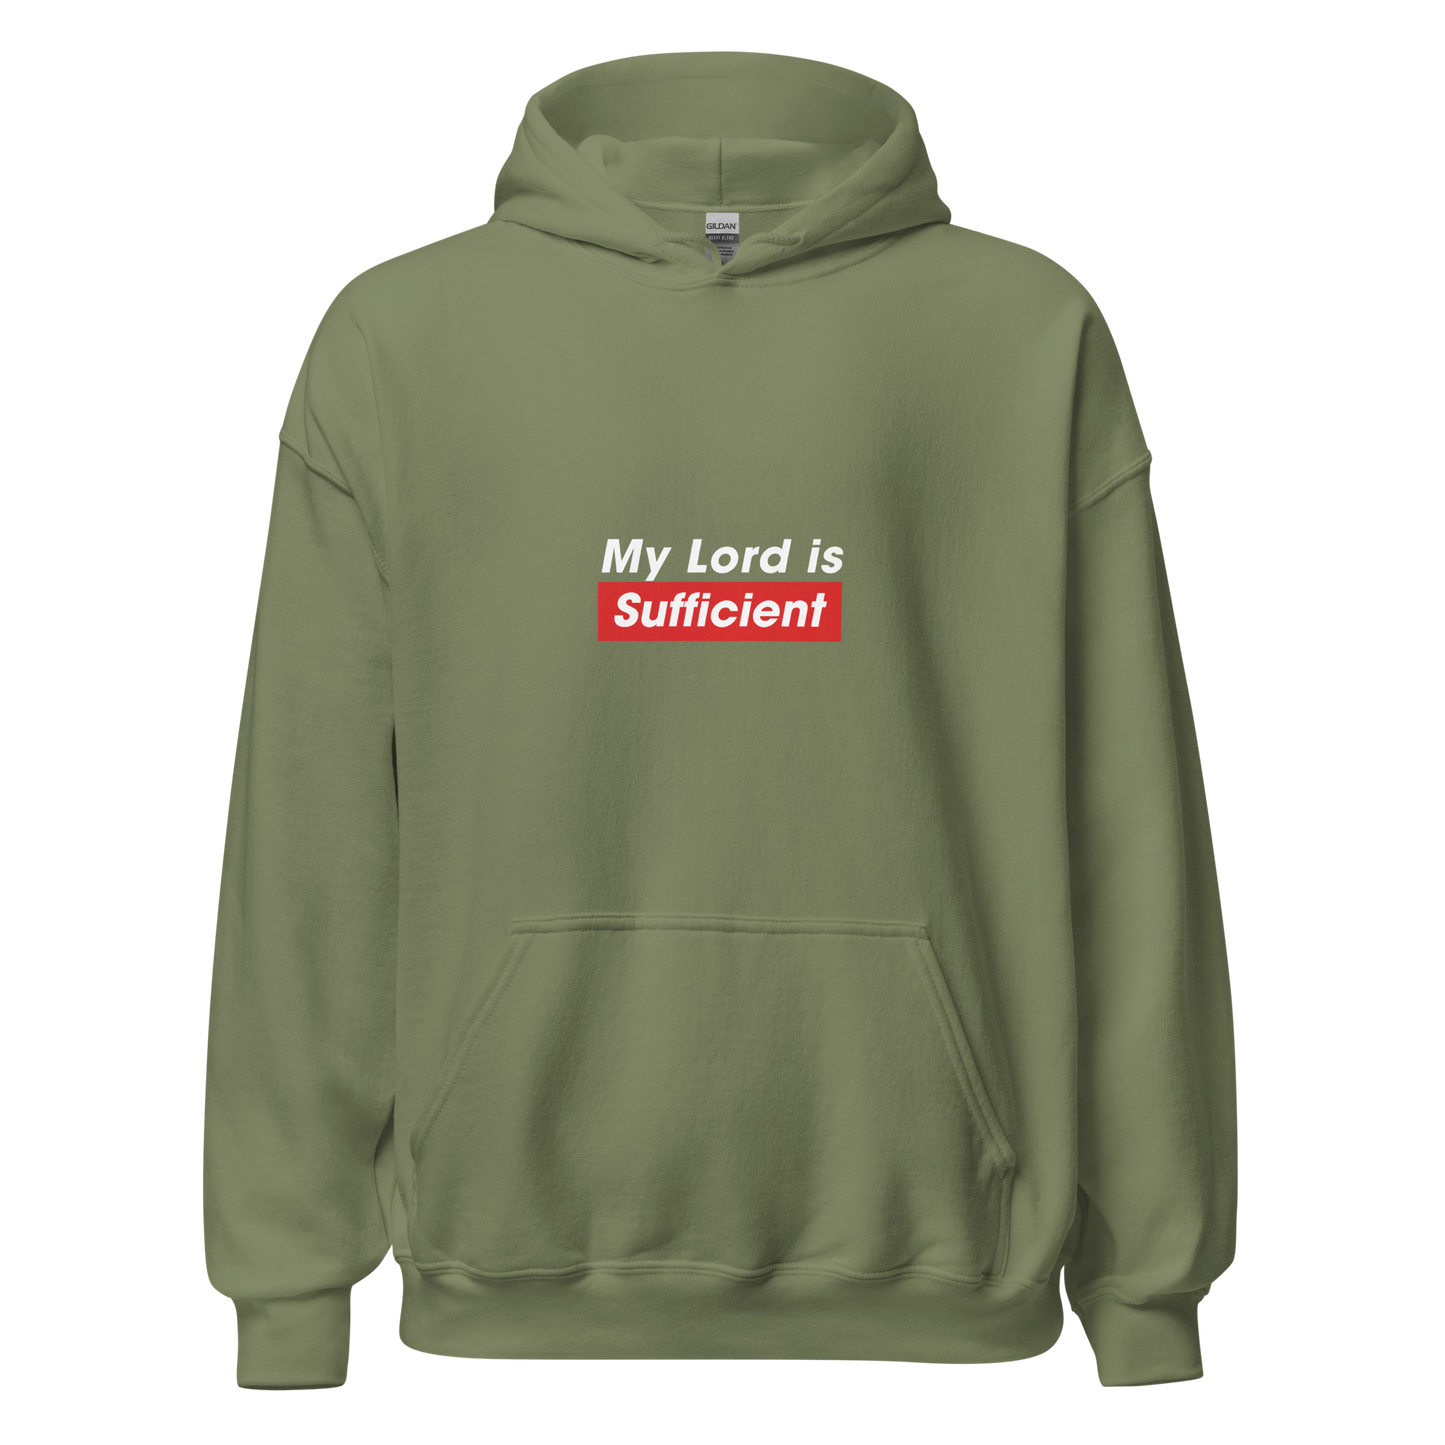 HOODIE Heavy Blend (Adult) - MY LORD IS SUFFICIENT (Centered/Medium) - White